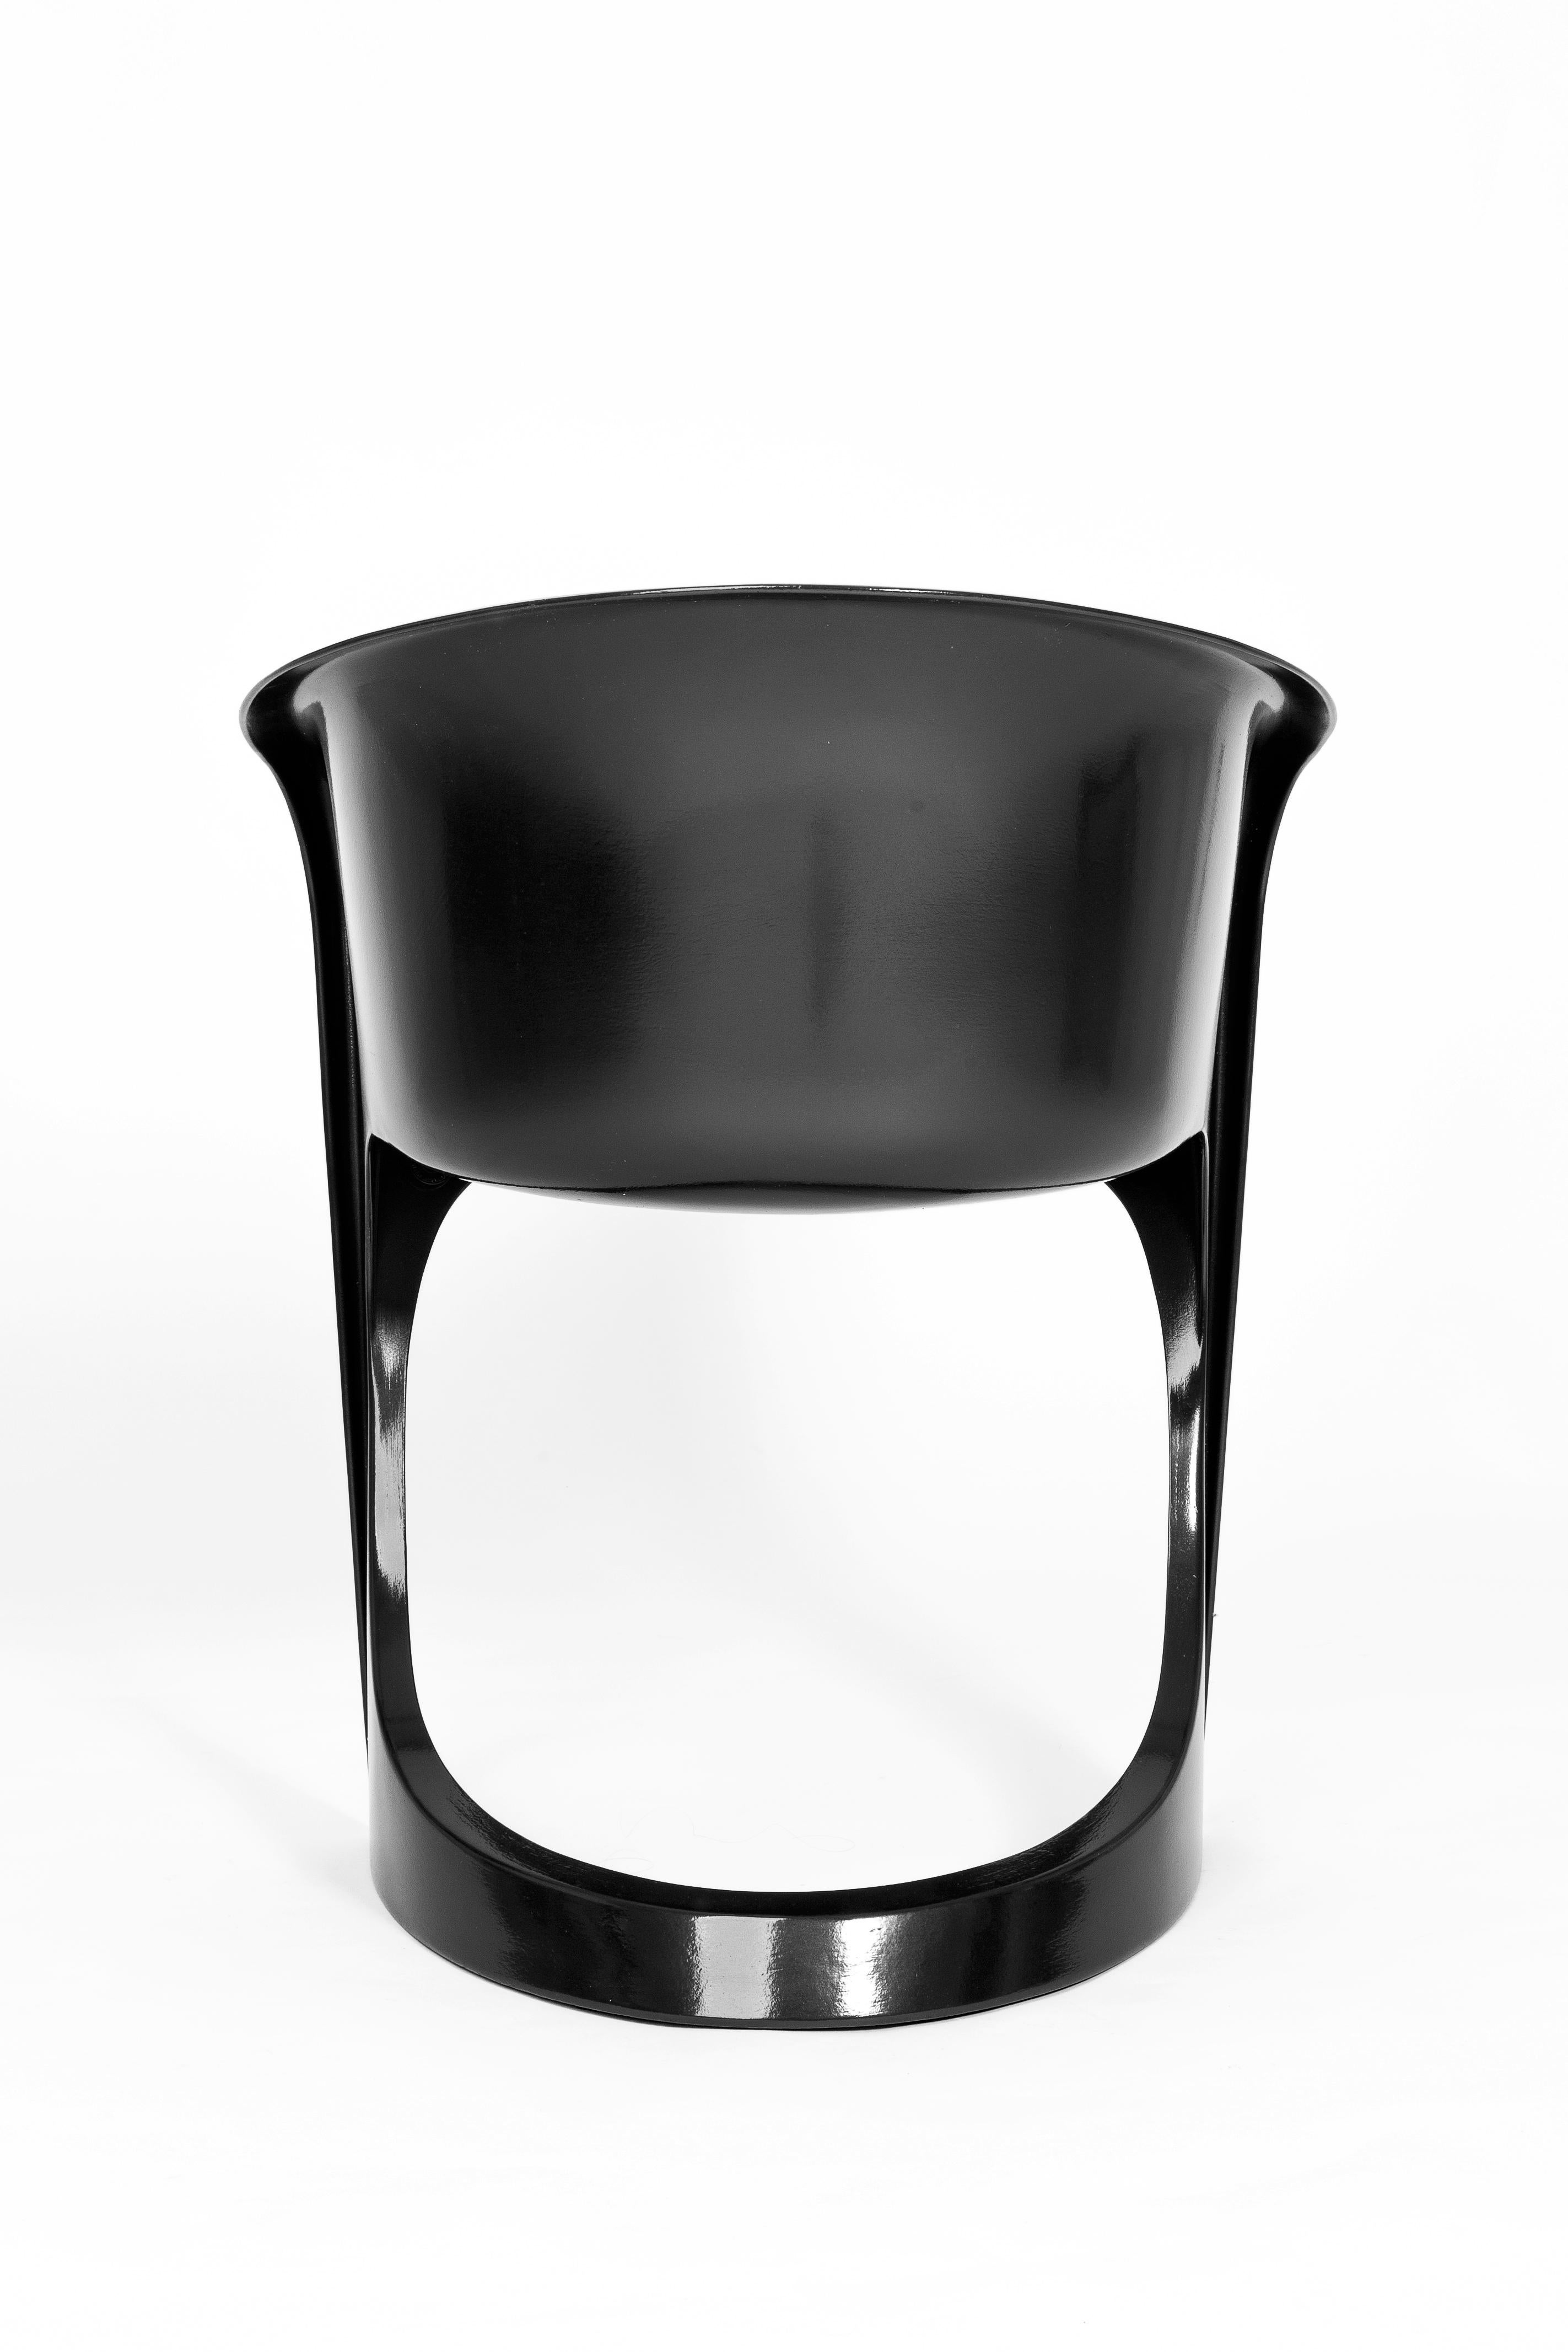 Set of Four Black Glossy Cado Chairs, Steen Østergaard, 1974 For Sale 2